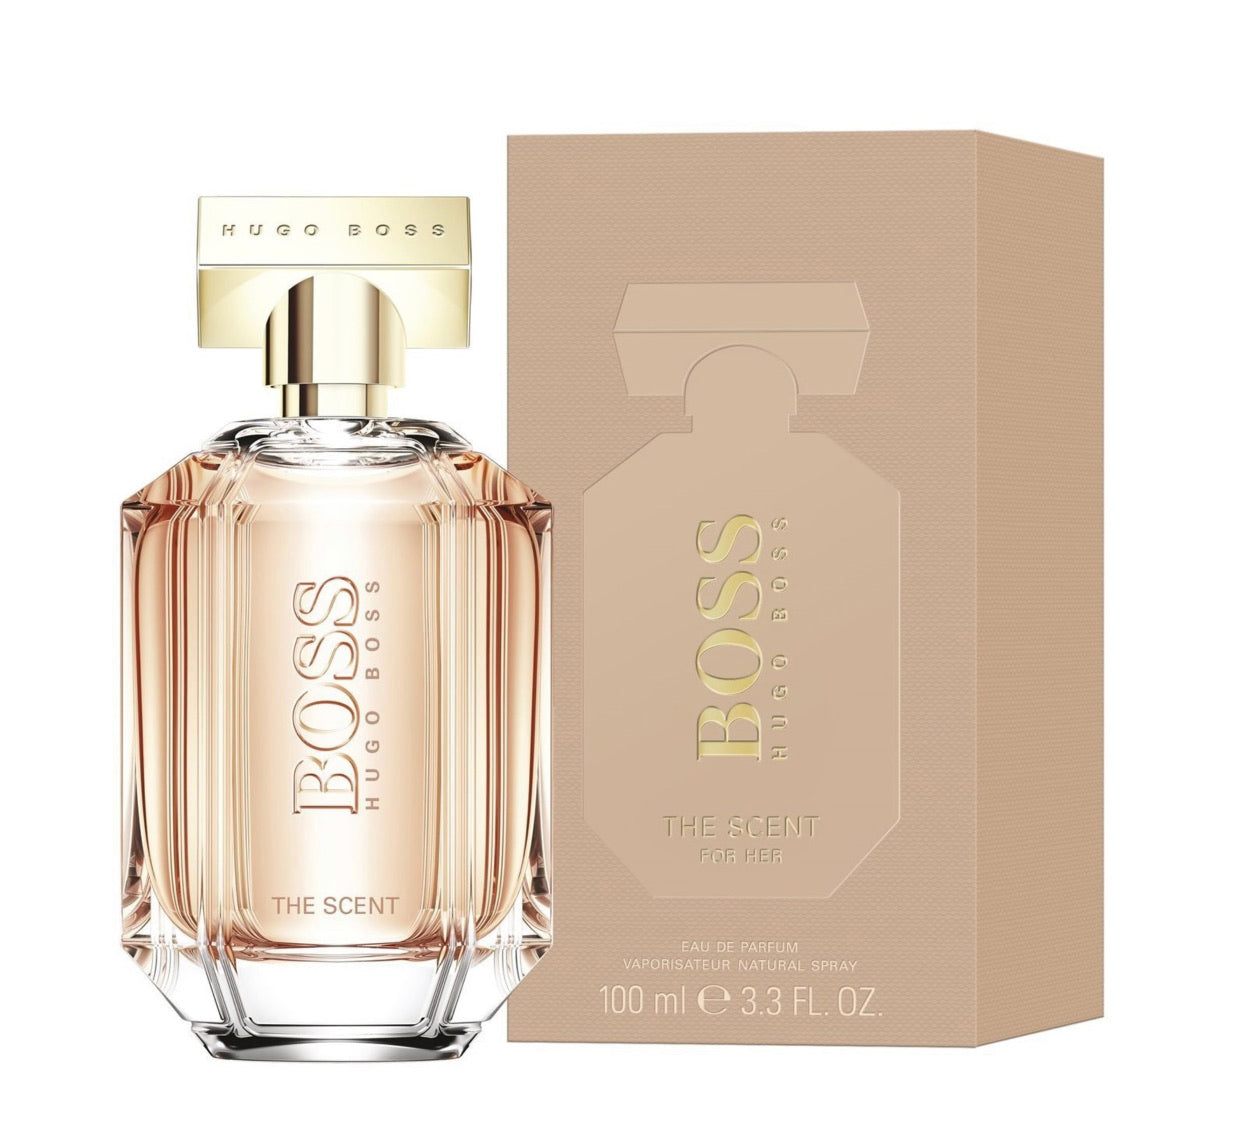 Hugo BOSS The Scent for Her